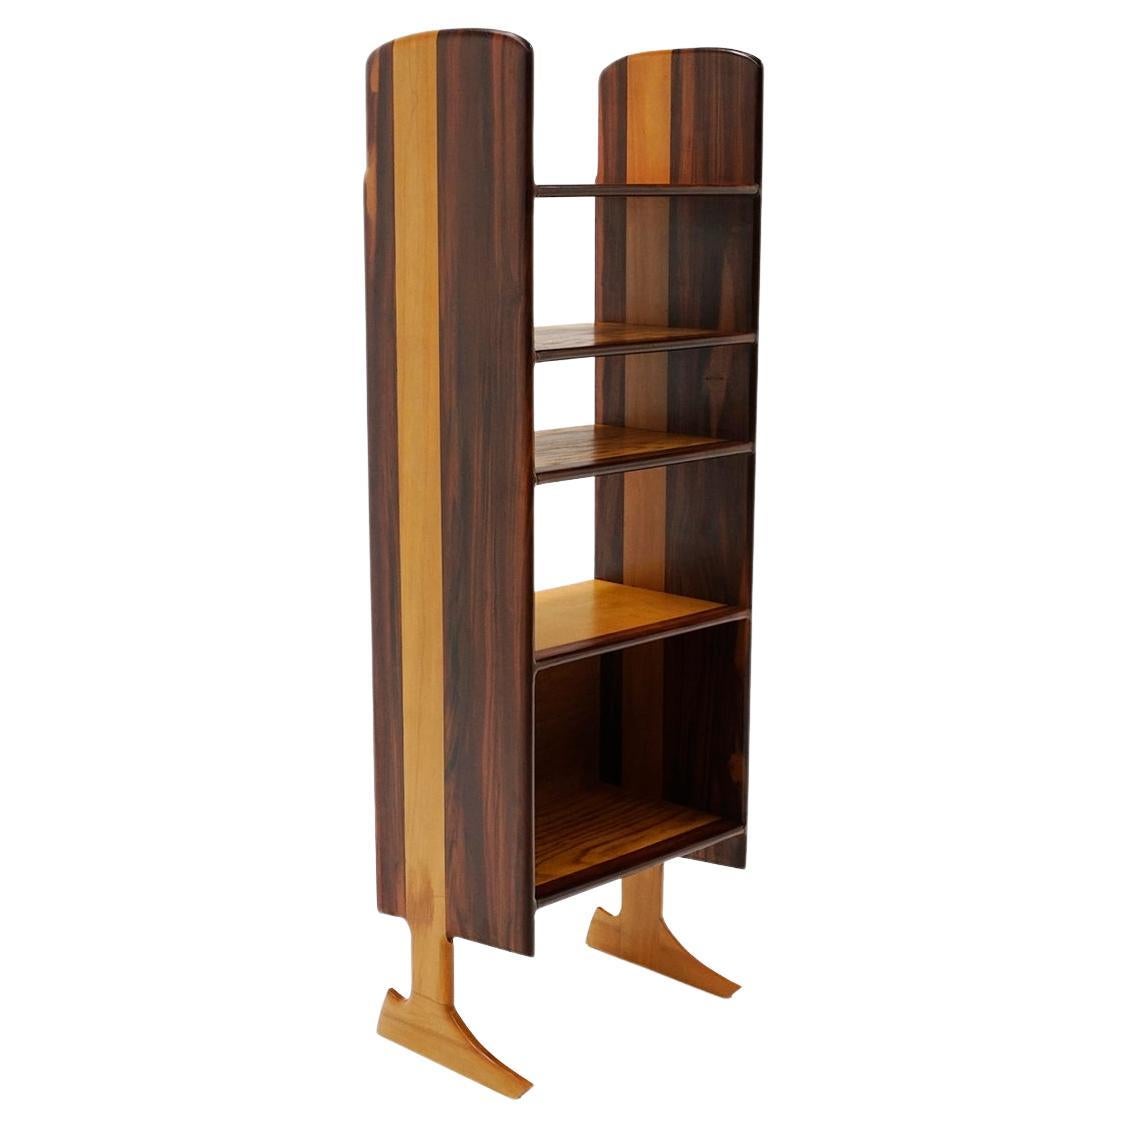 Studio Craft Rosewood Bookcase, Four Shelves and Open Storage, Unique One off For Sale